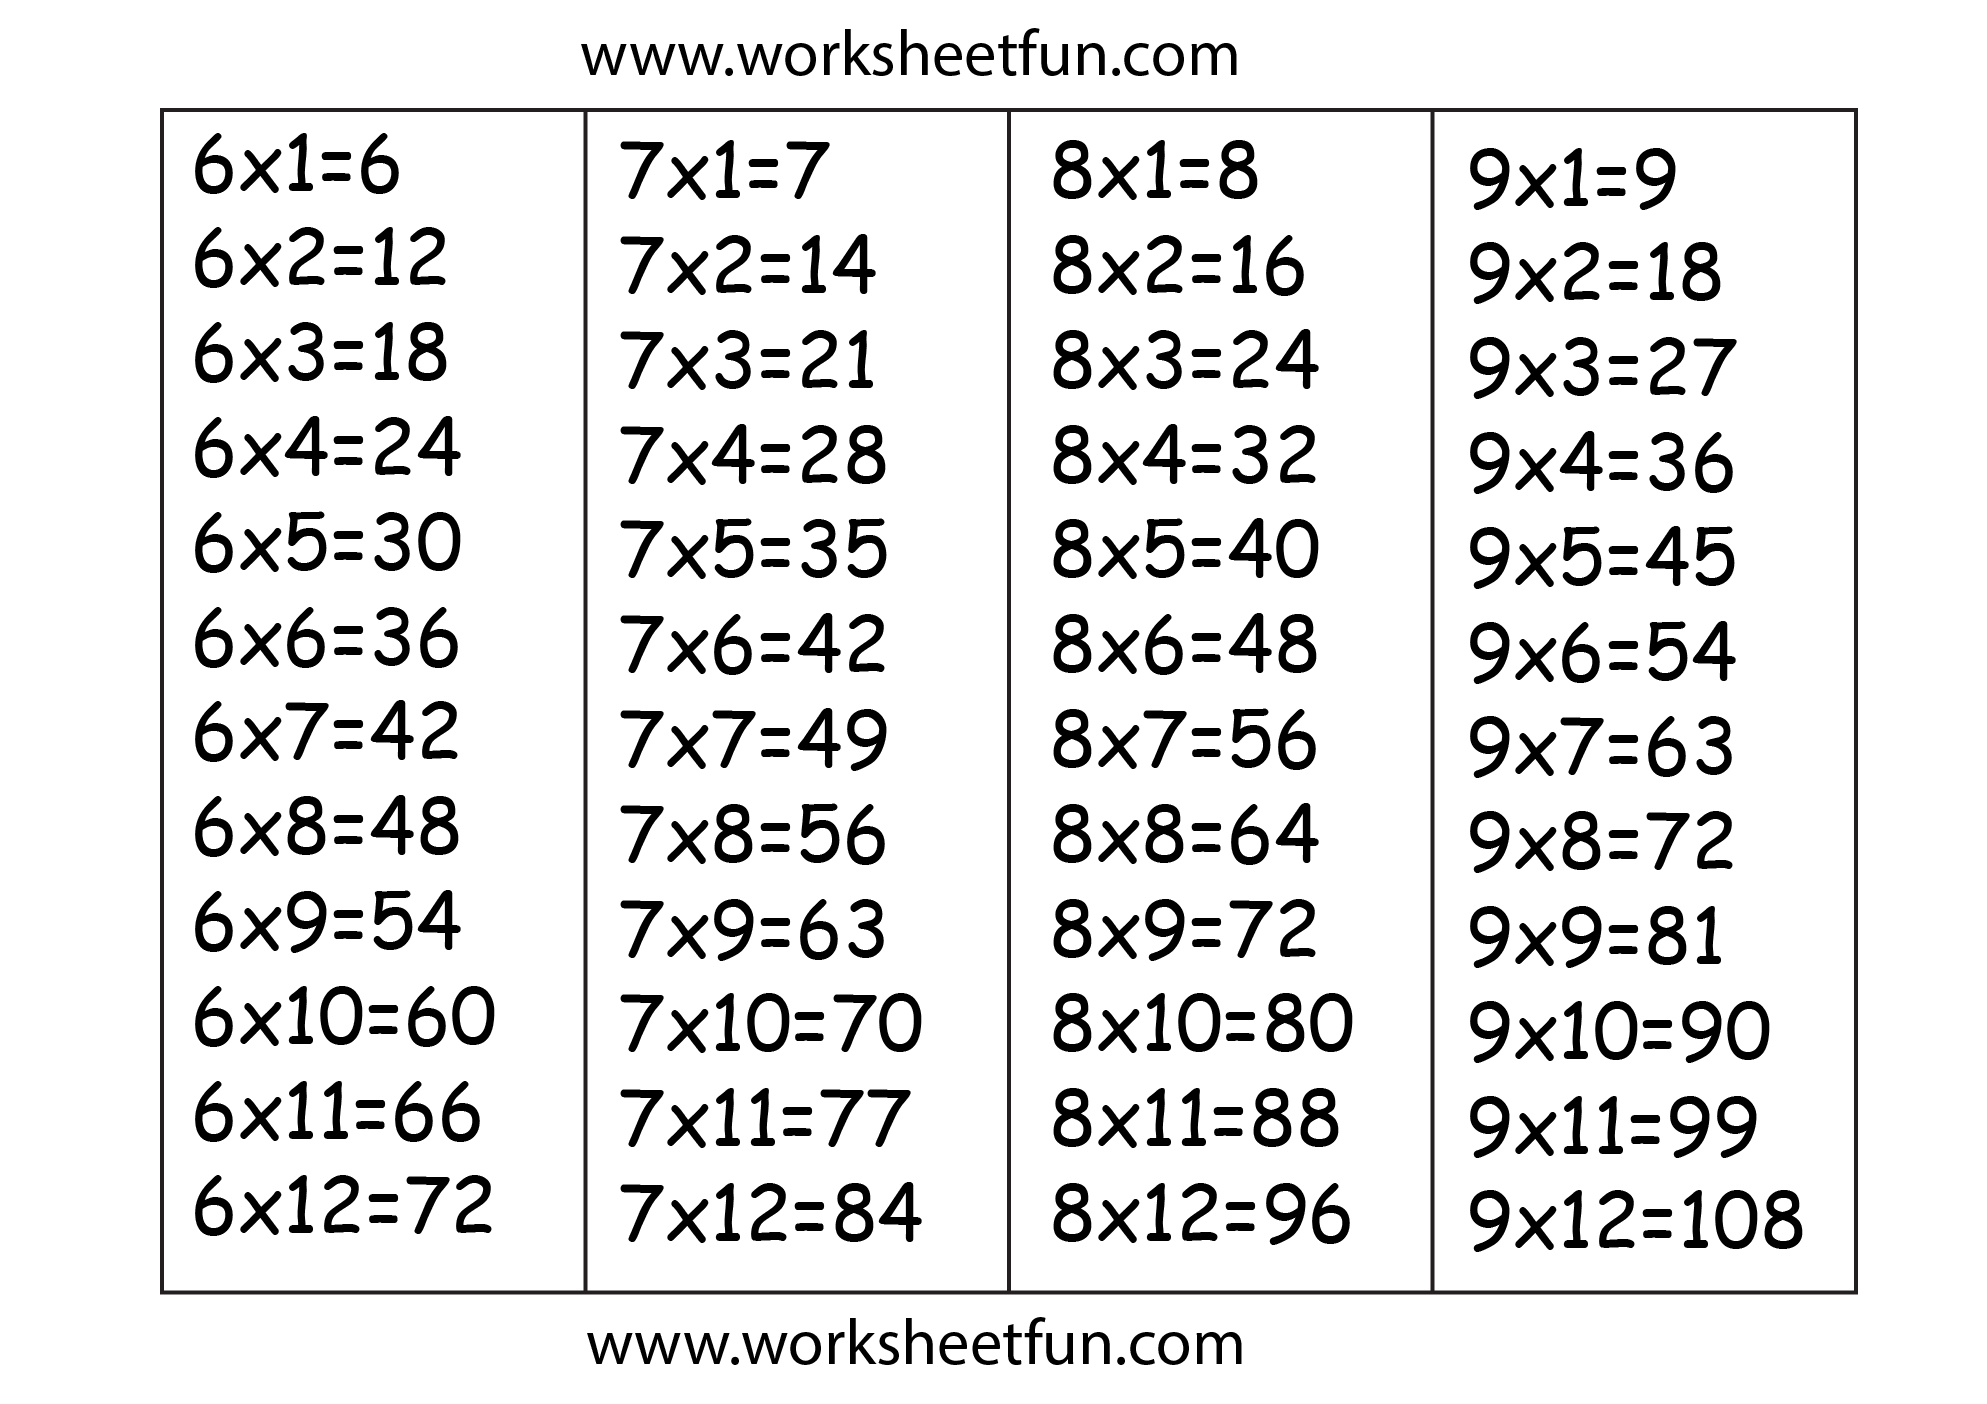 Times Table Chart – 6, 7, 8 & 9 / FREE Printable Worksheets ...